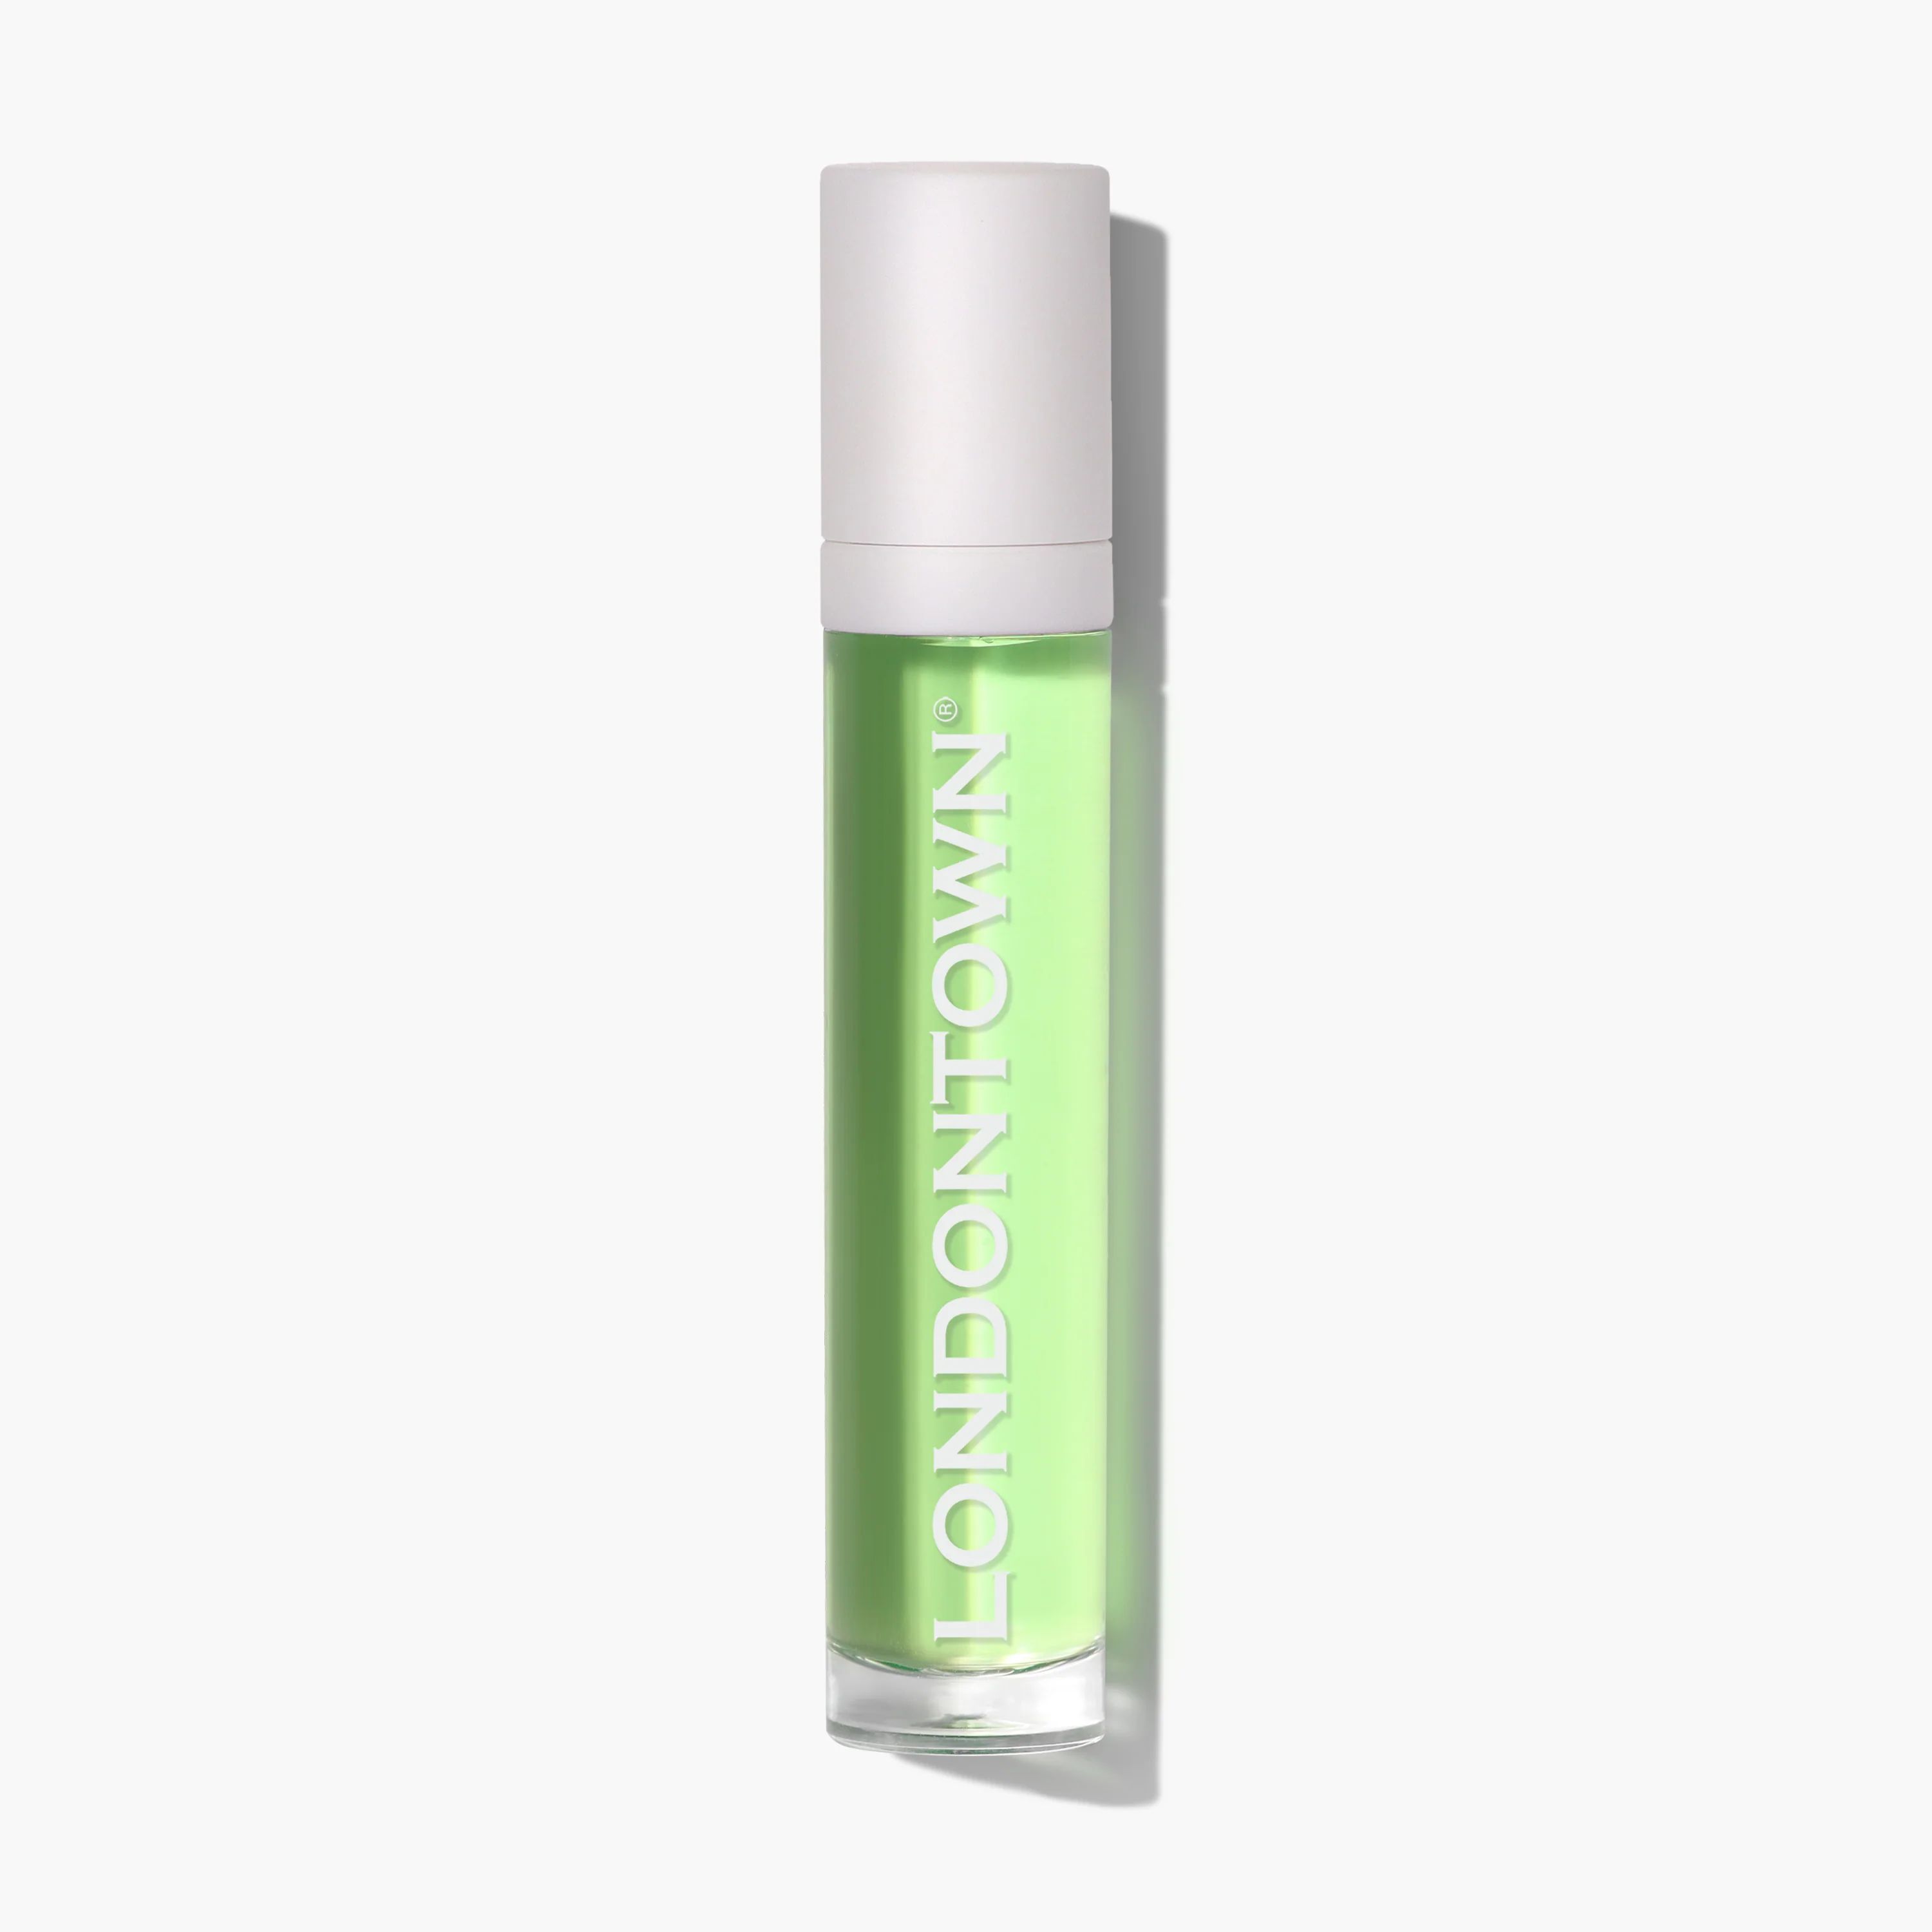 Roll & Glow Cuticle Oil - Agave Pear | Londontown